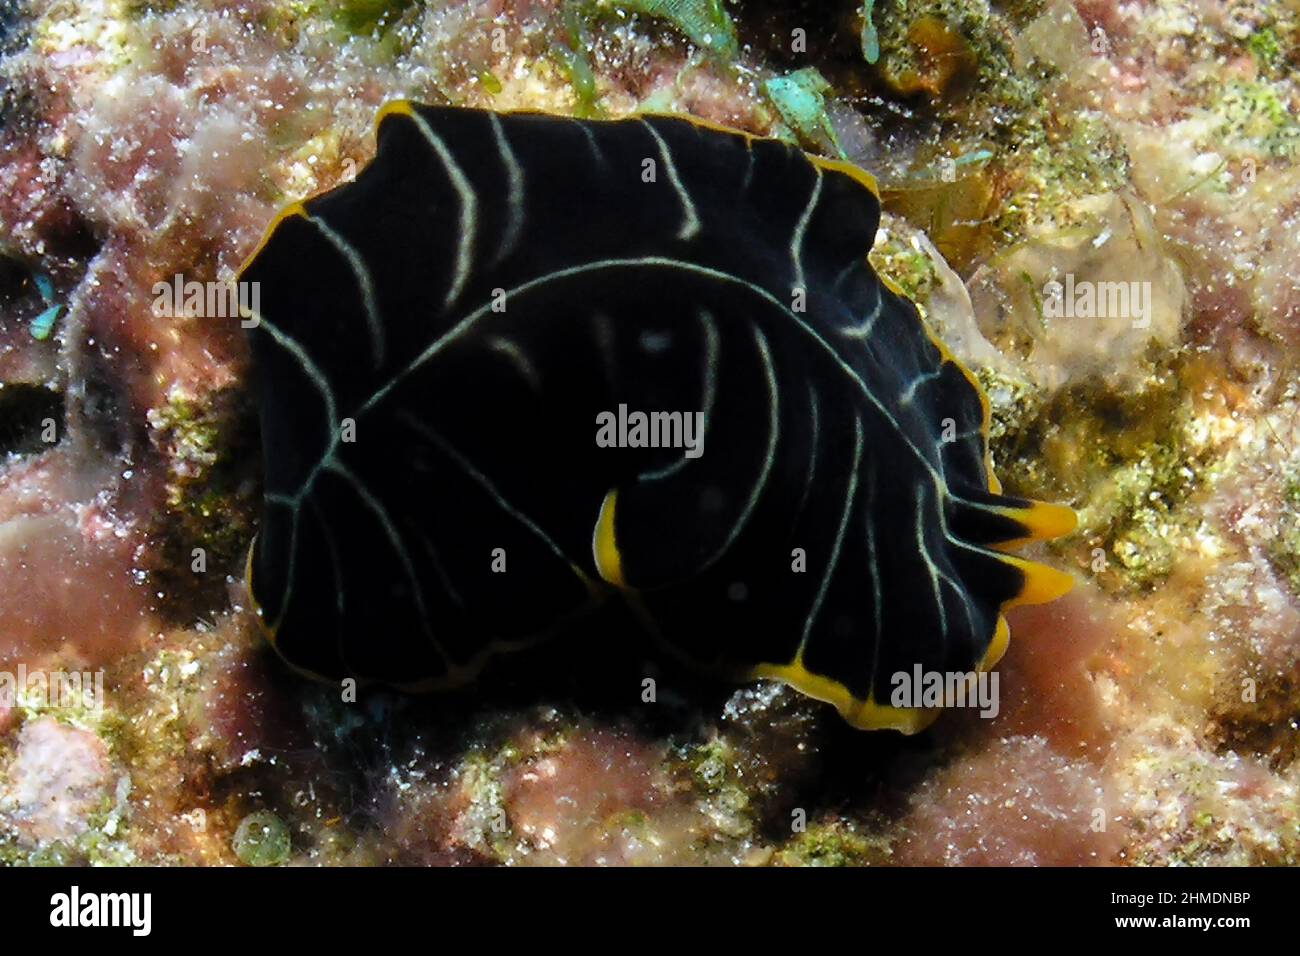 A Divided Flatworm (Pseudoceros dimidiatus) in the Red Sea Stock Photo